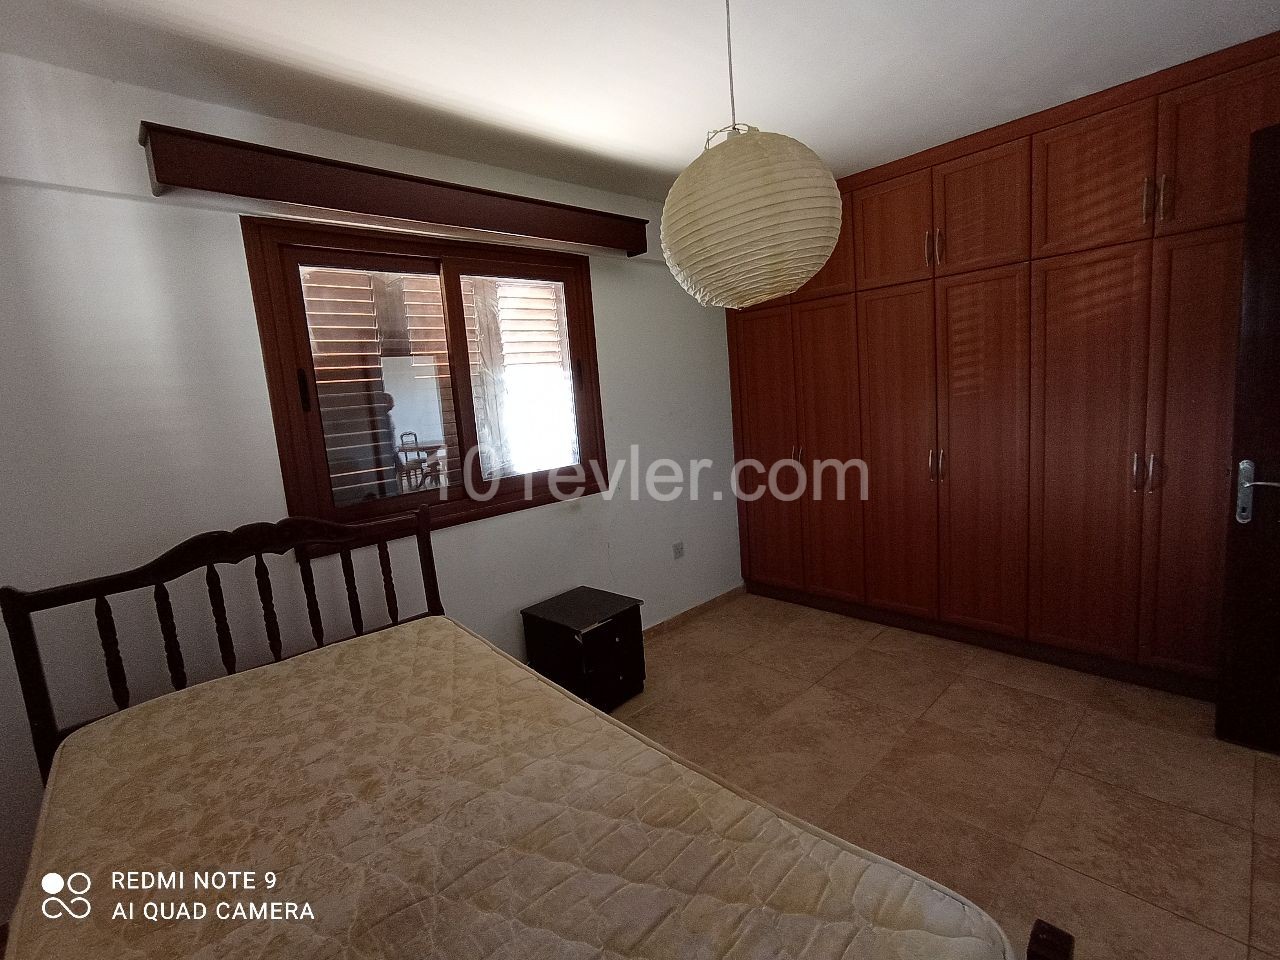 SPACIOUS 2+1 APARTMENT IN KYRENIA MERMAID DISTRICT VERY CLOSE TO THE MAIN ROAD! ** 